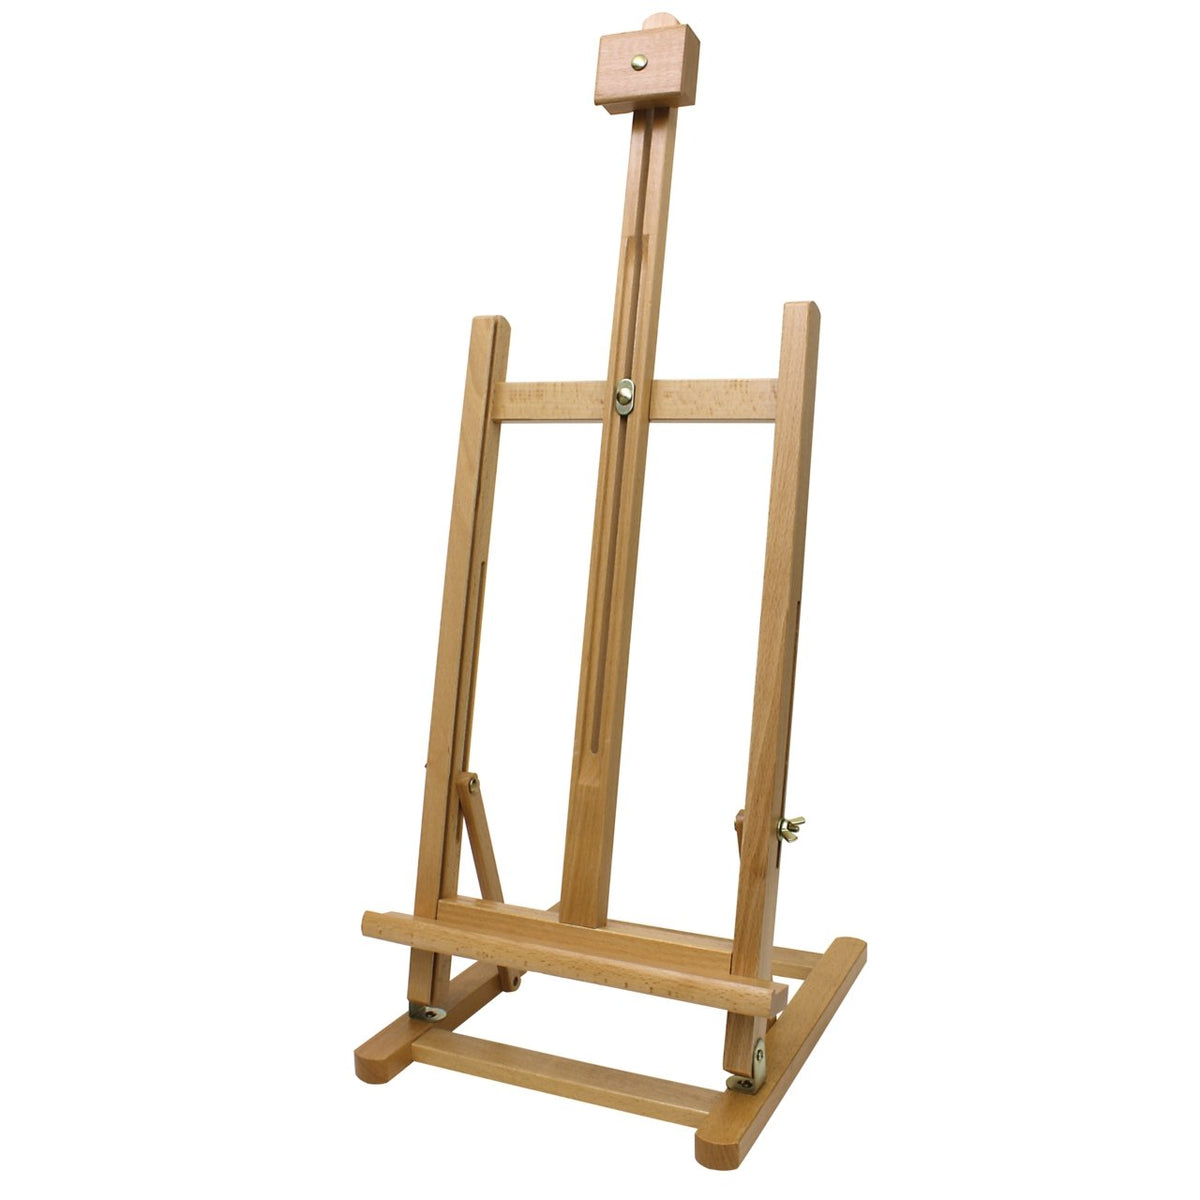 Art Alternatives Studio Tabletop Easel (for canvases up to 24 inch tall) - merriartist.com